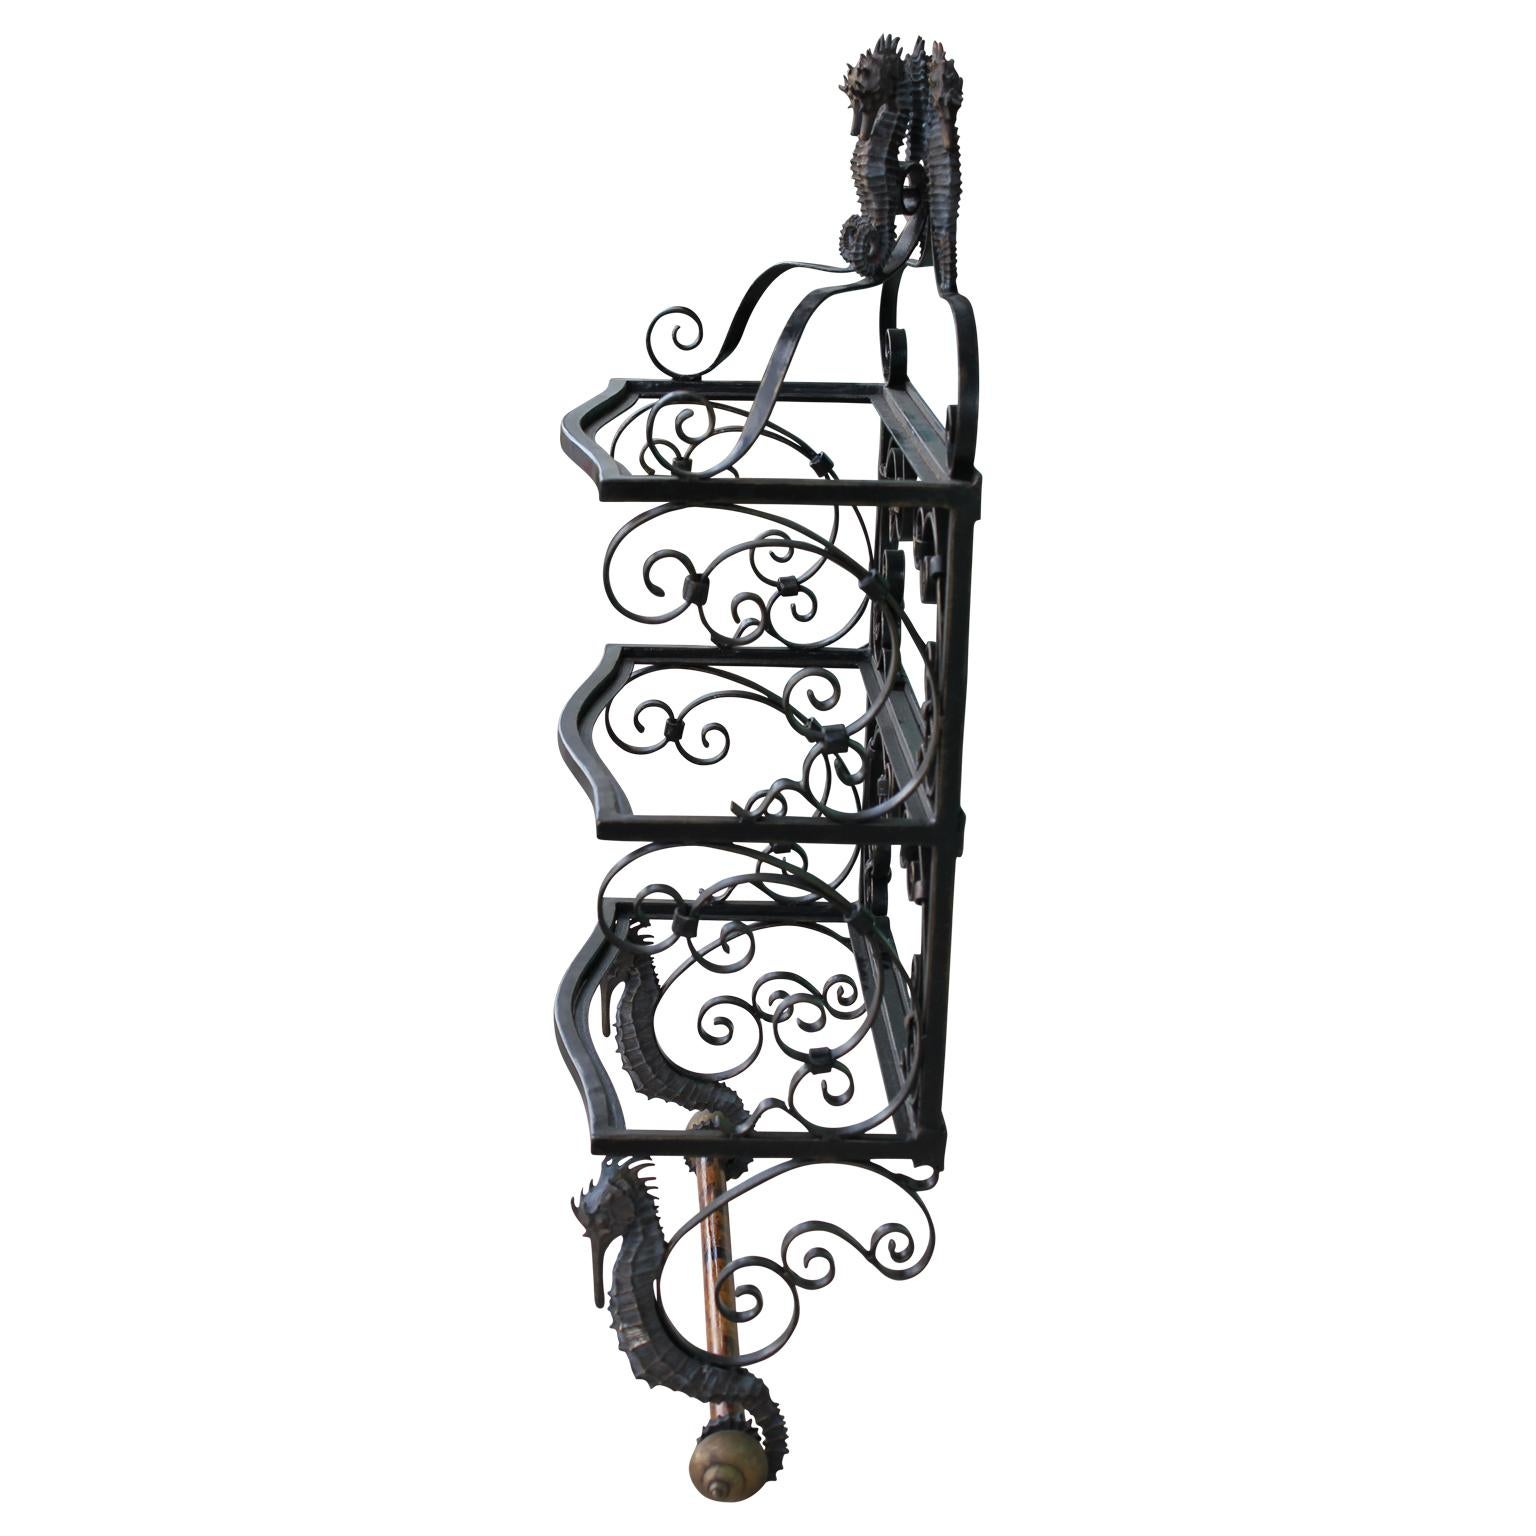 Gorgeous display shelf by Maitland Smith made from wrought iron featuring a nautical theme with seahorses and shells, donning a bamboo dowel on the bottom.